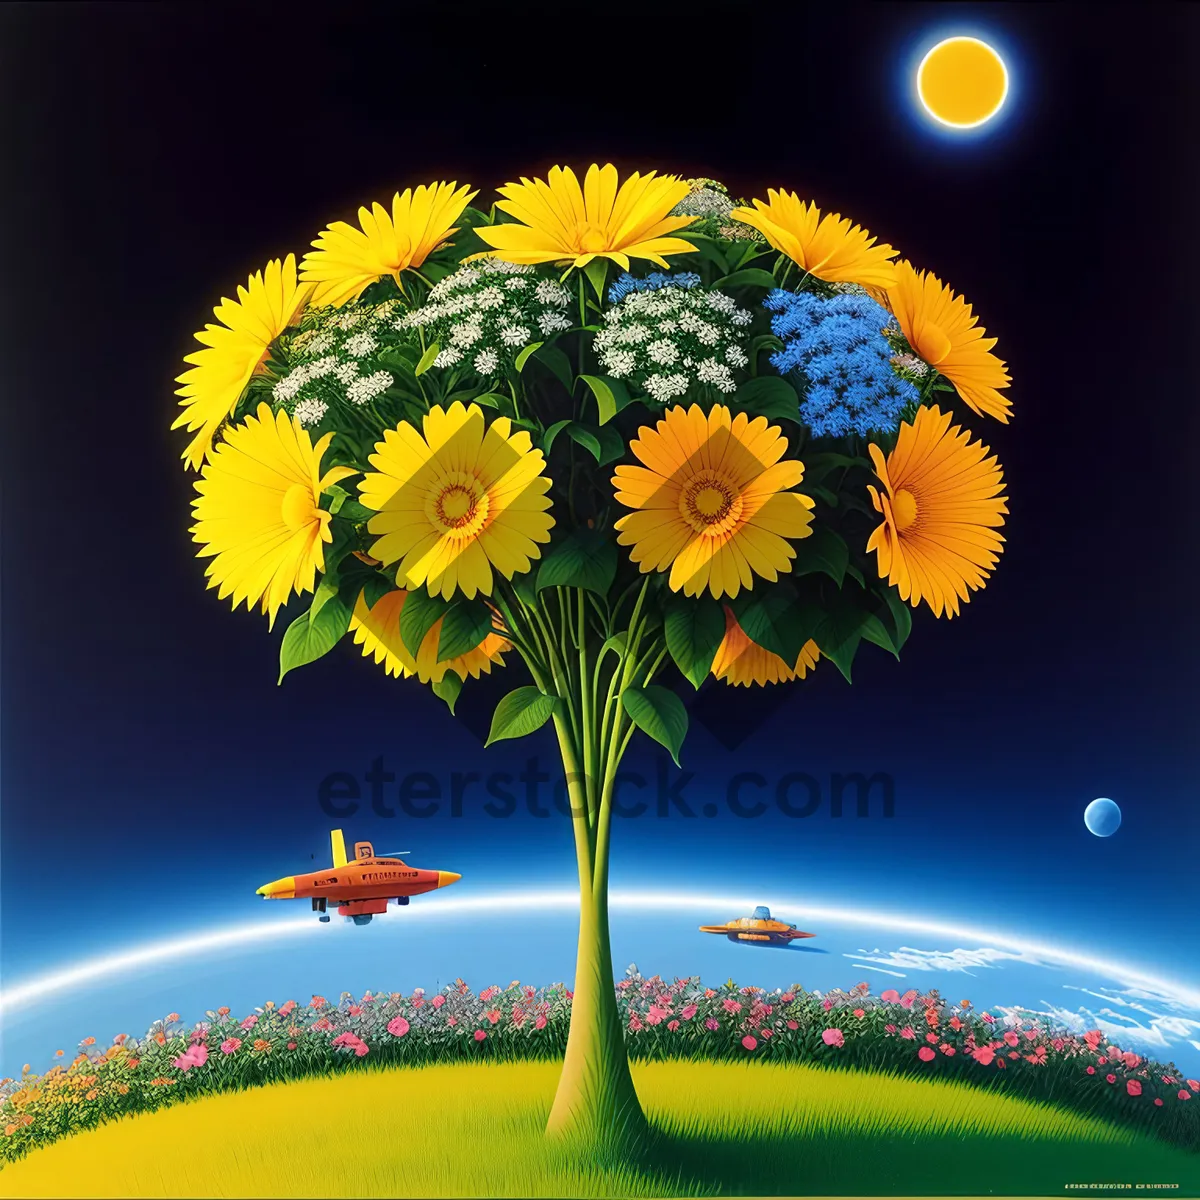 Picture of Sun-kissed Floral Bliss: A Vibrant Yellow Daisy Blossom in Full Bloom